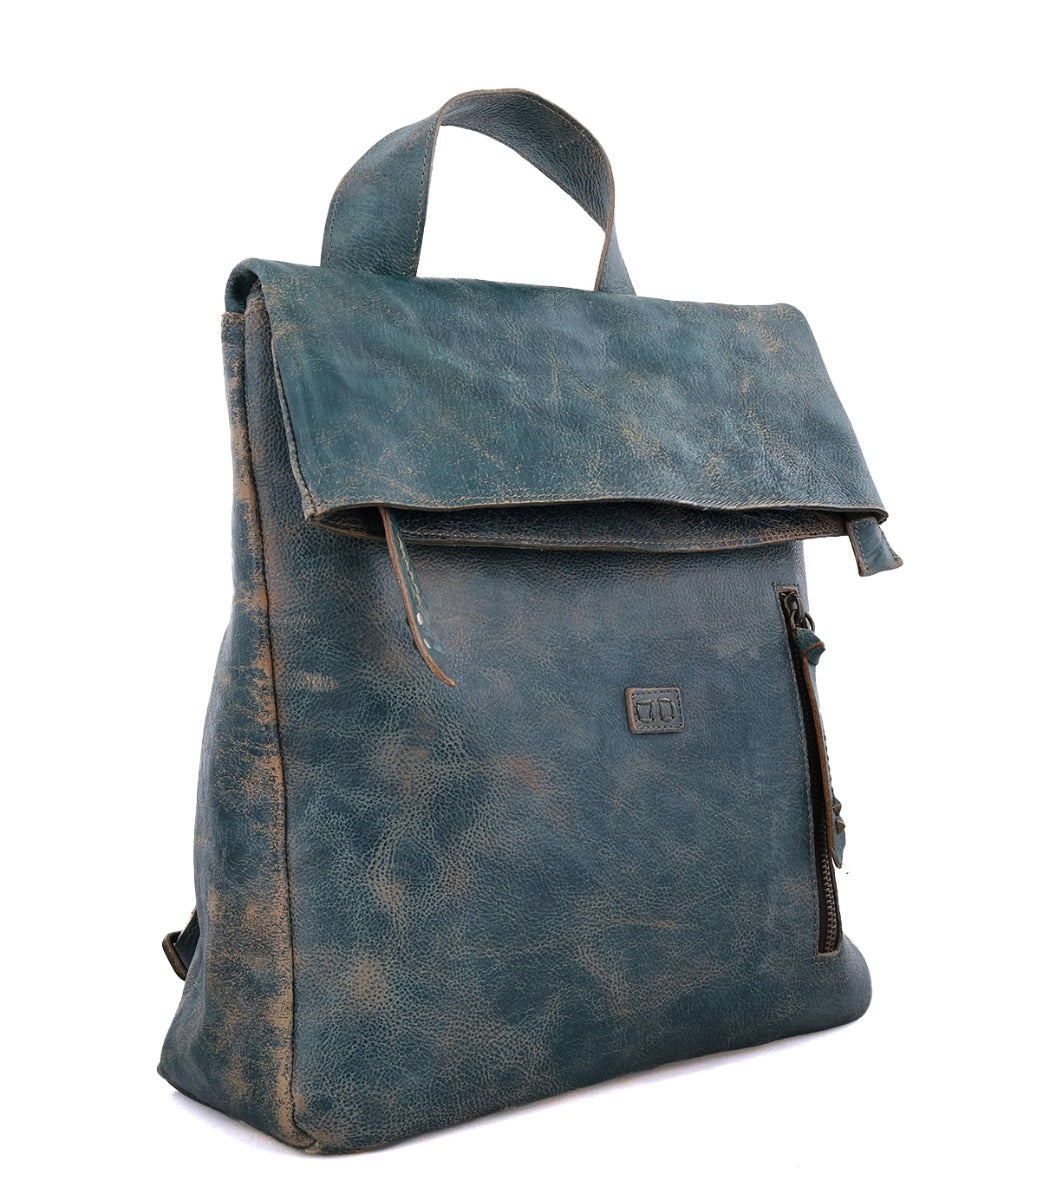 A Howie dark teal leather backpack with a zipper by Bed Stu.